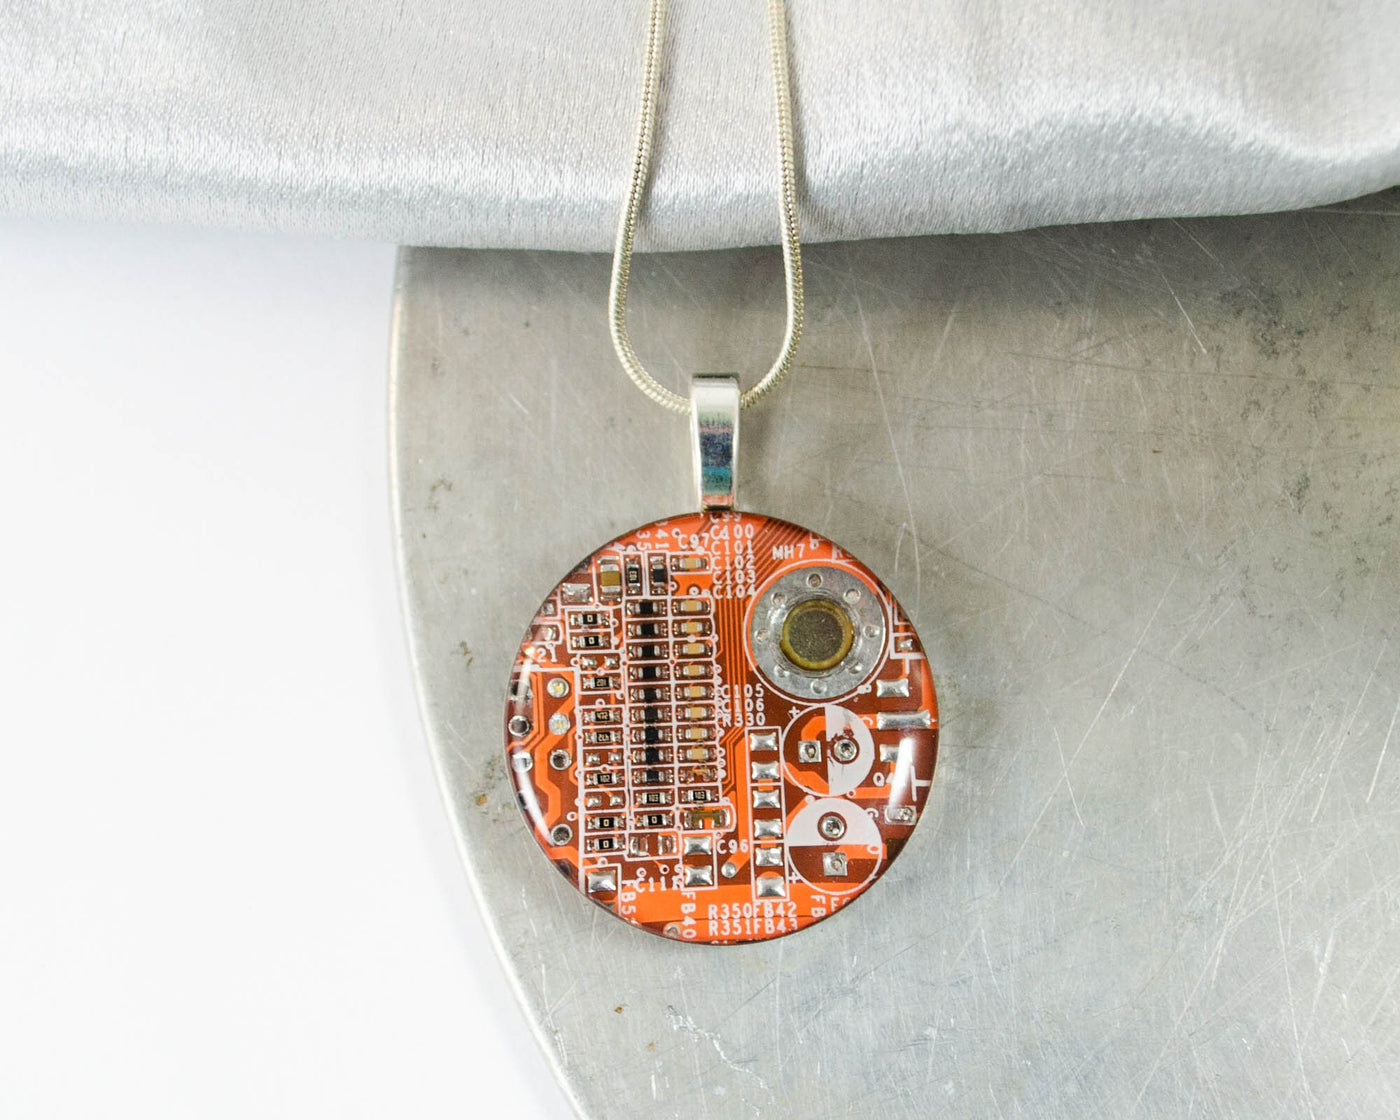 Large Circuit Board Necklace Orange, Recycled Motherboard Jewelry, Electrical Engineer Necklace, Geek Chic Jewelry, Upcycled PCB Neckalce